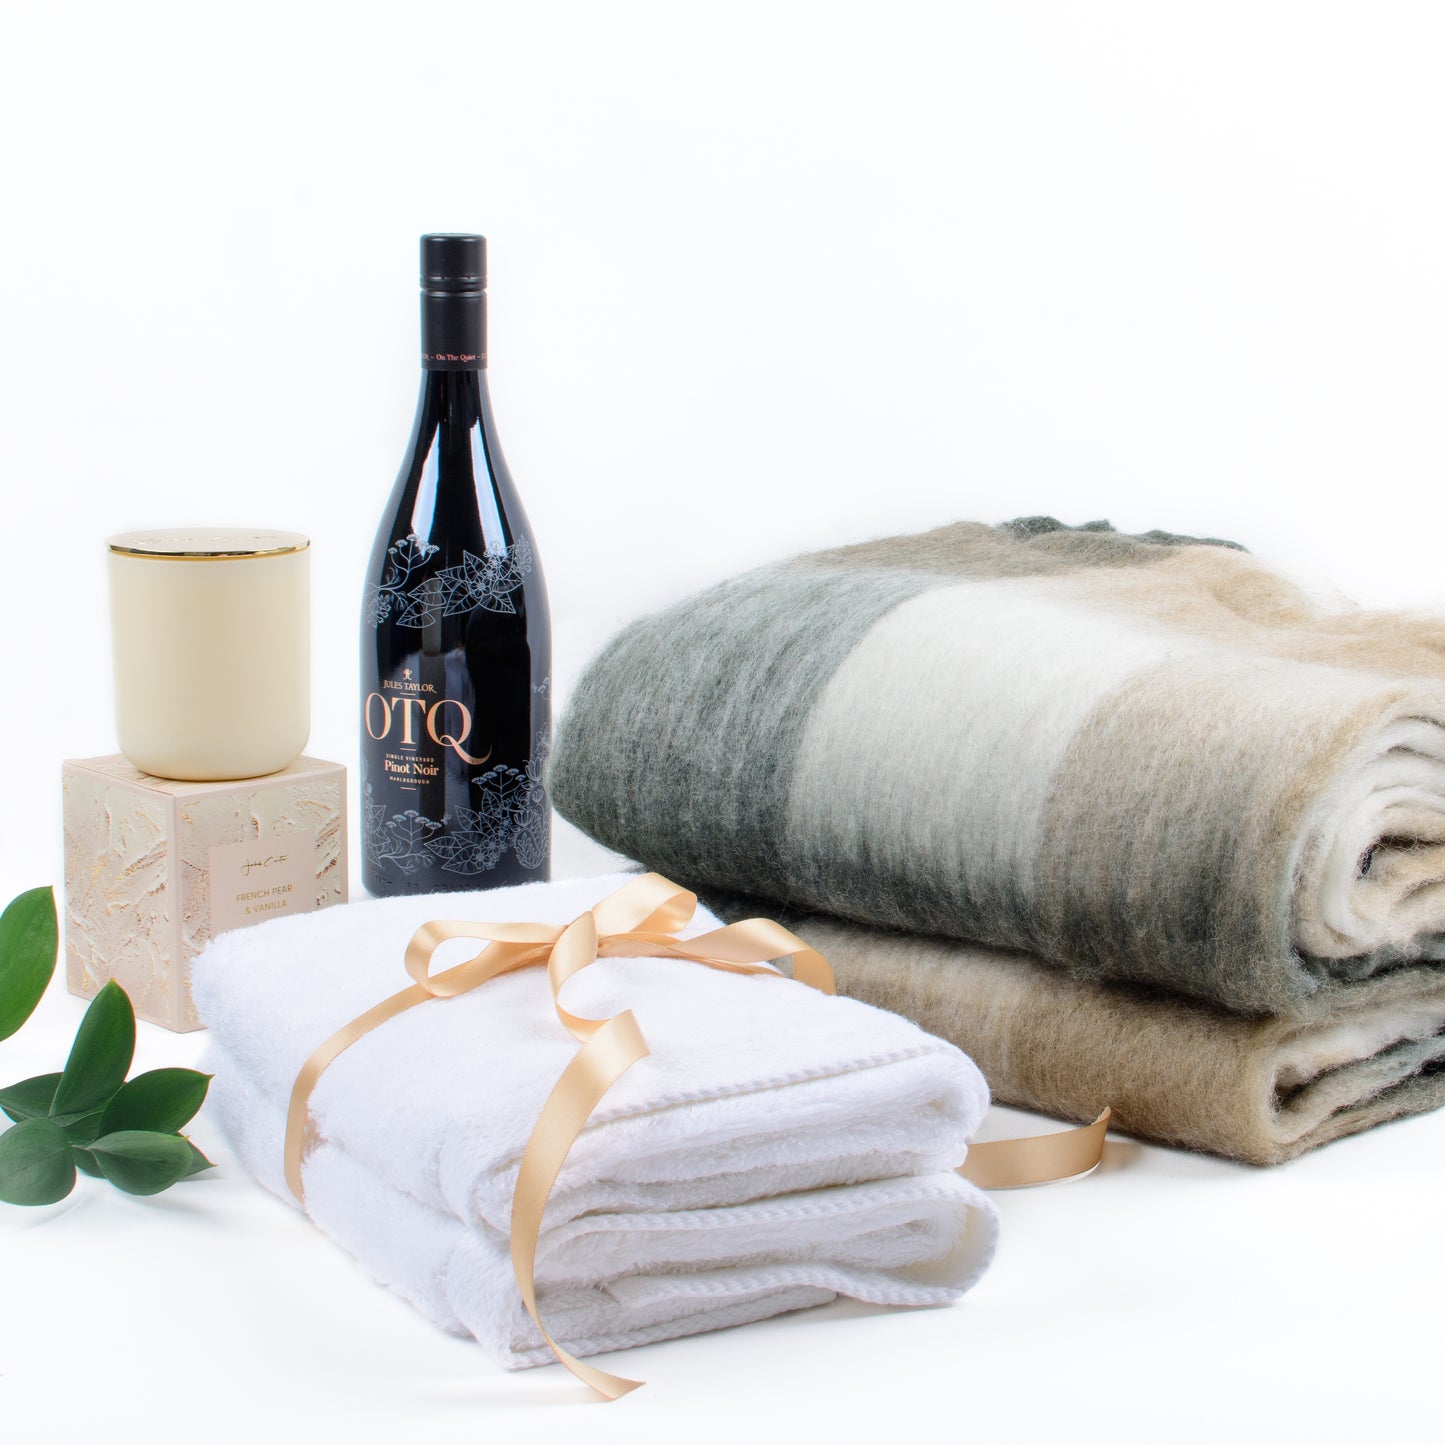 Products featured out of gift box are soft throw, red wine, two hand towels, scented candle.